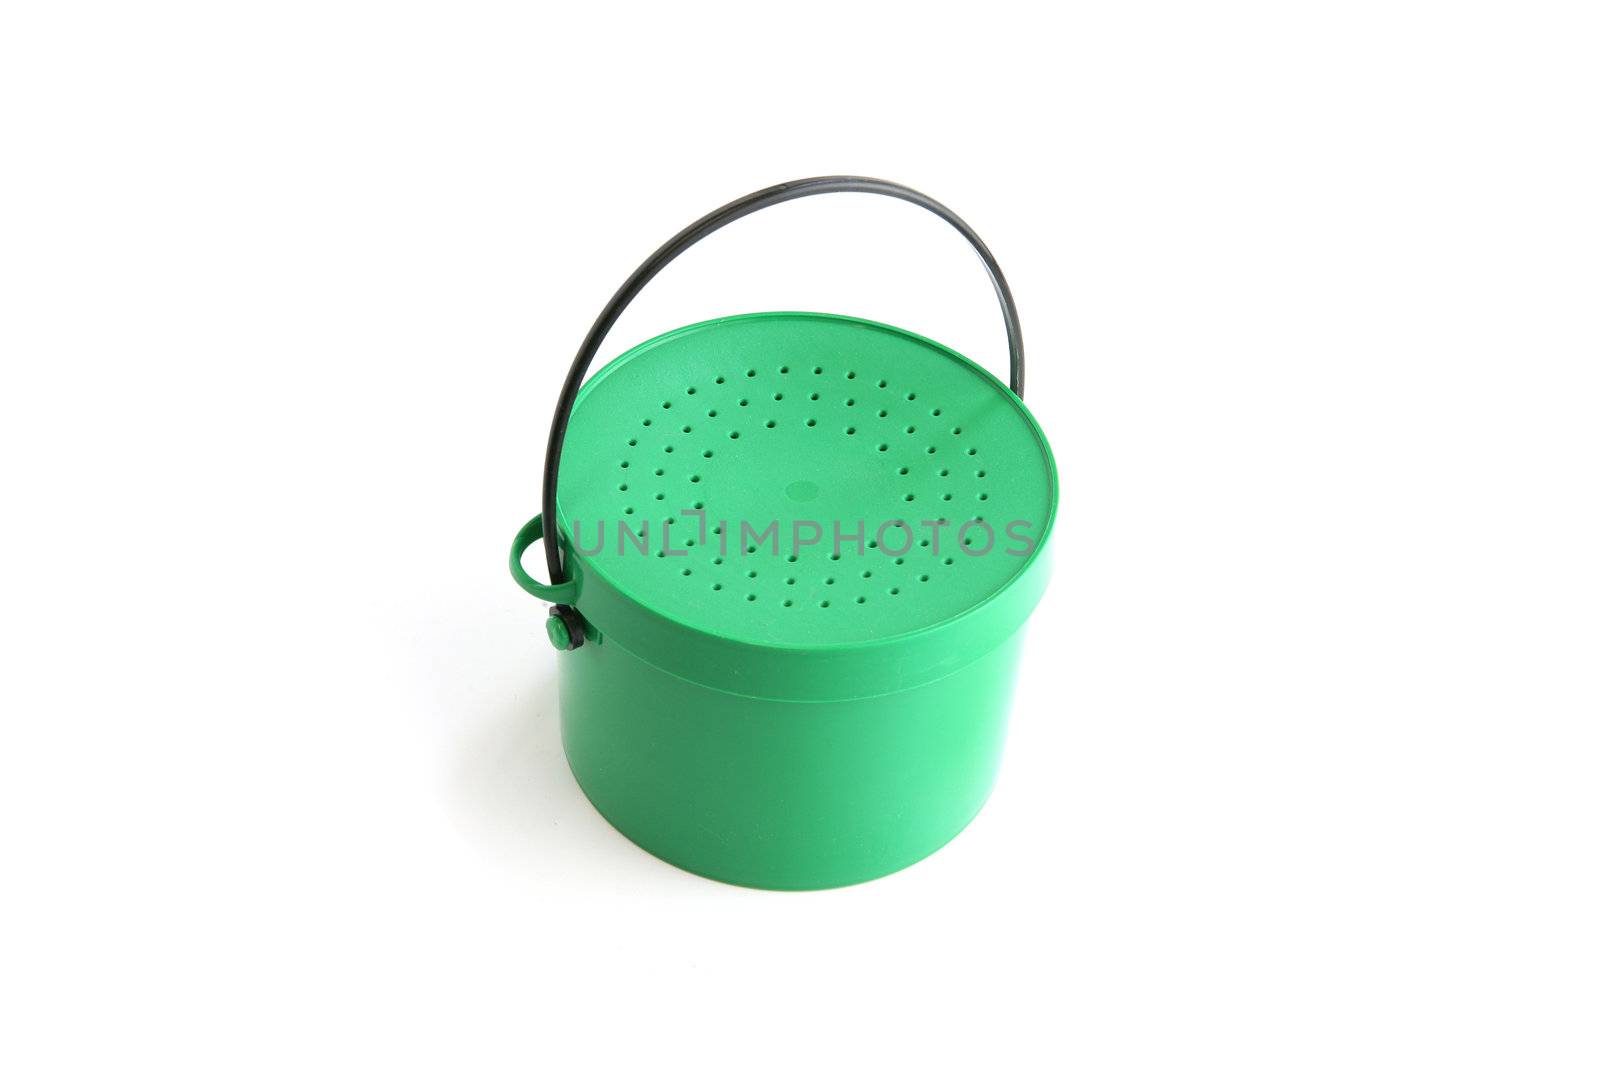 Tin bucket with a perforated lid by phovoir